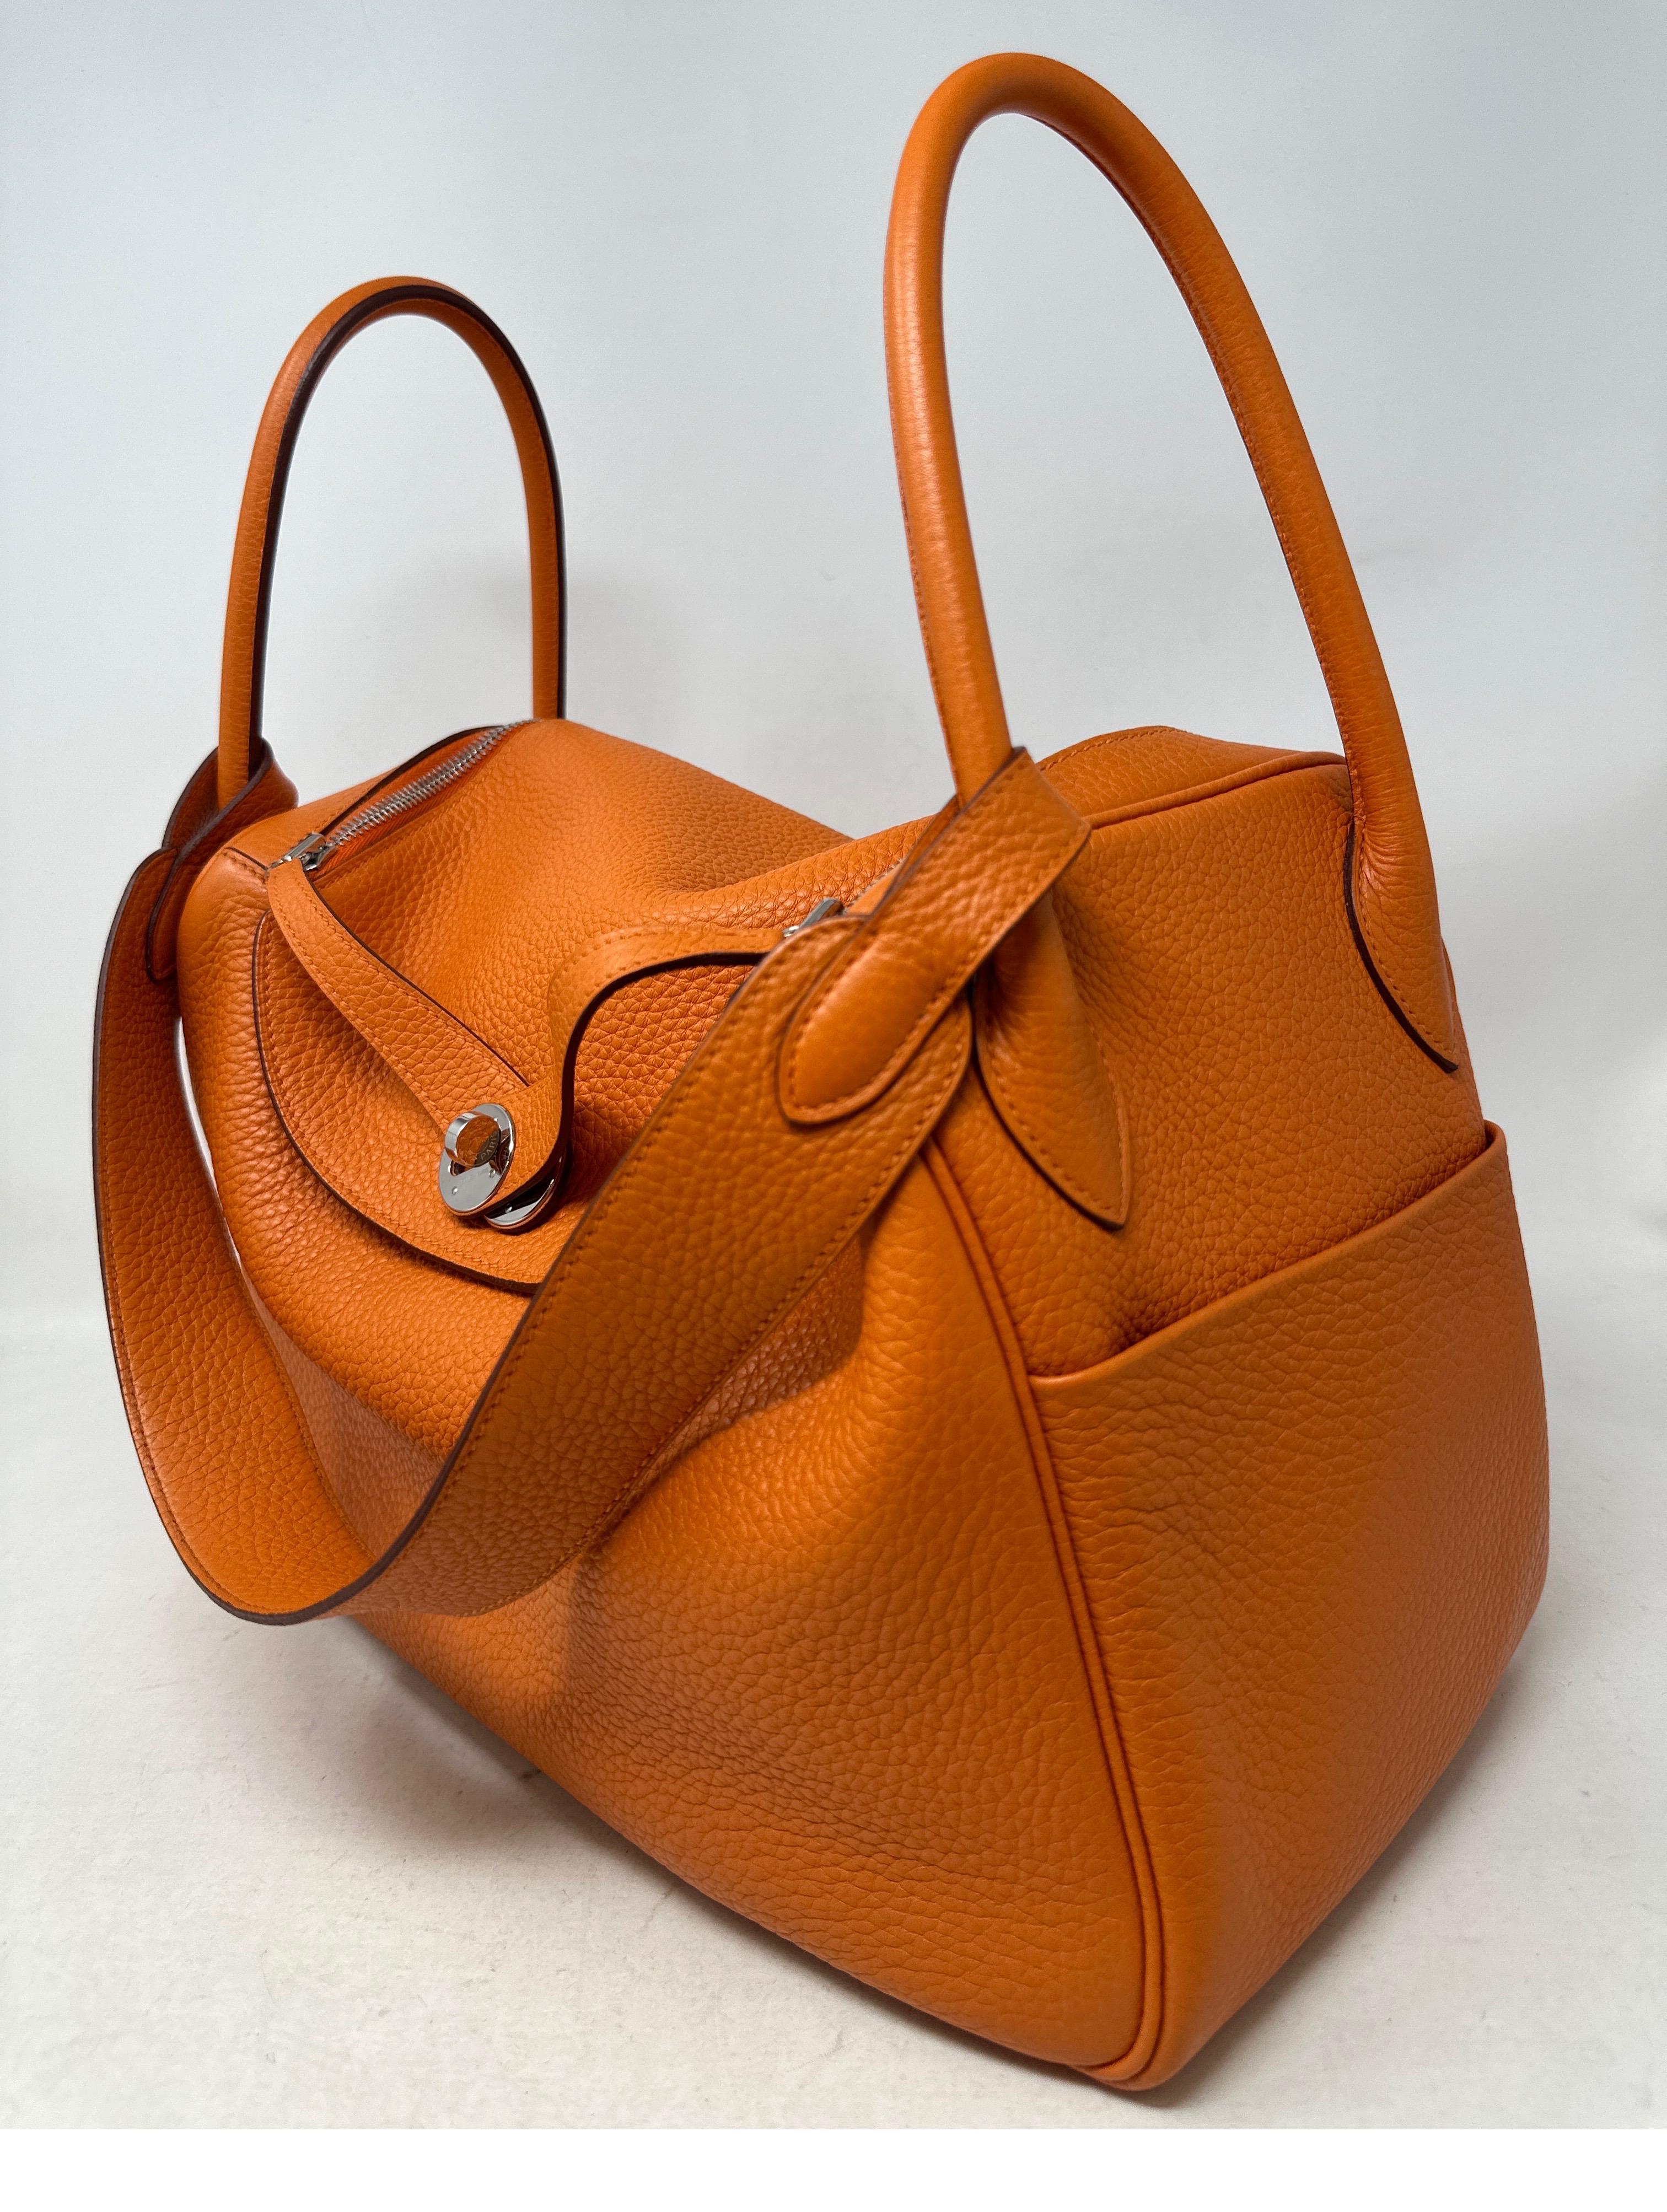 Hermes Orange Lindy Bag. Excellent like new condition. Hard to find Lindy bag. Togo leather. Palladium silver hardware. Size 34. Includes dust bag and box. Guaranteed authentic. 